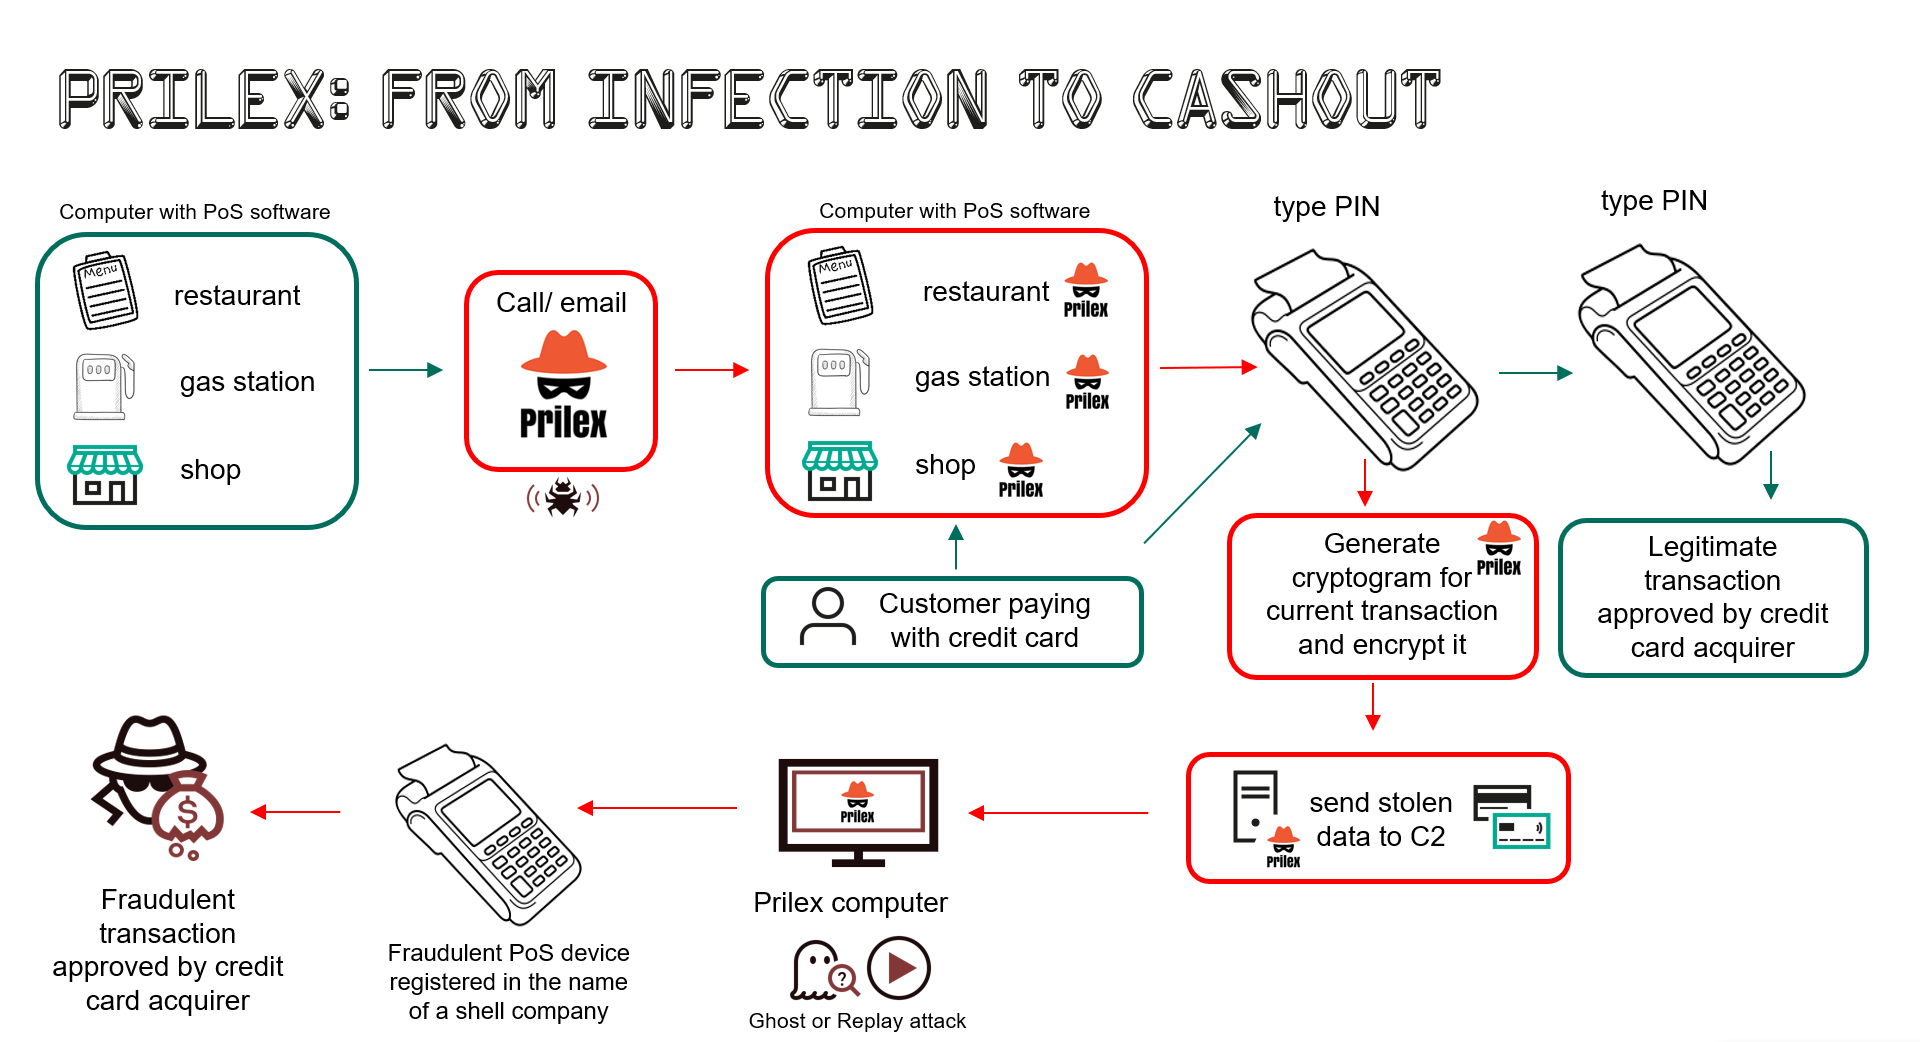 Replay attacks against payment systems